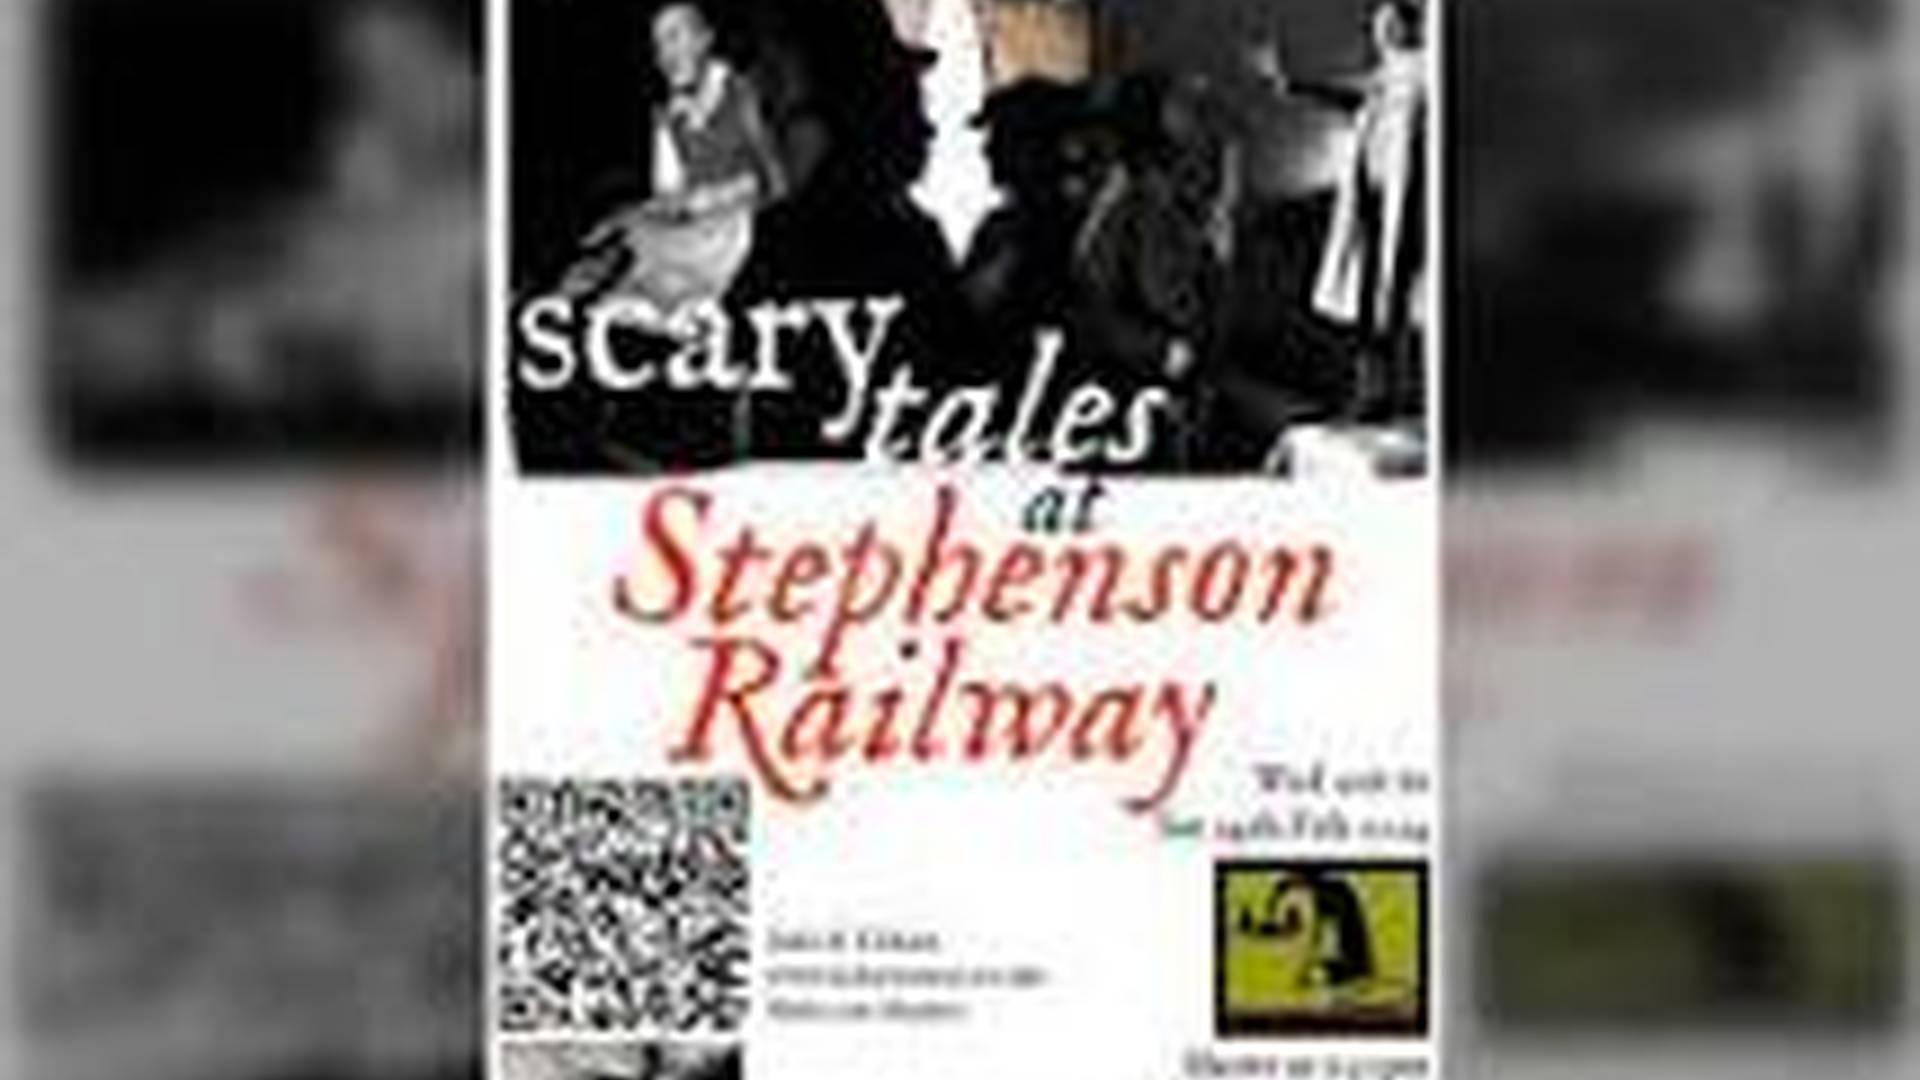 Scary Tales at the Railway photo